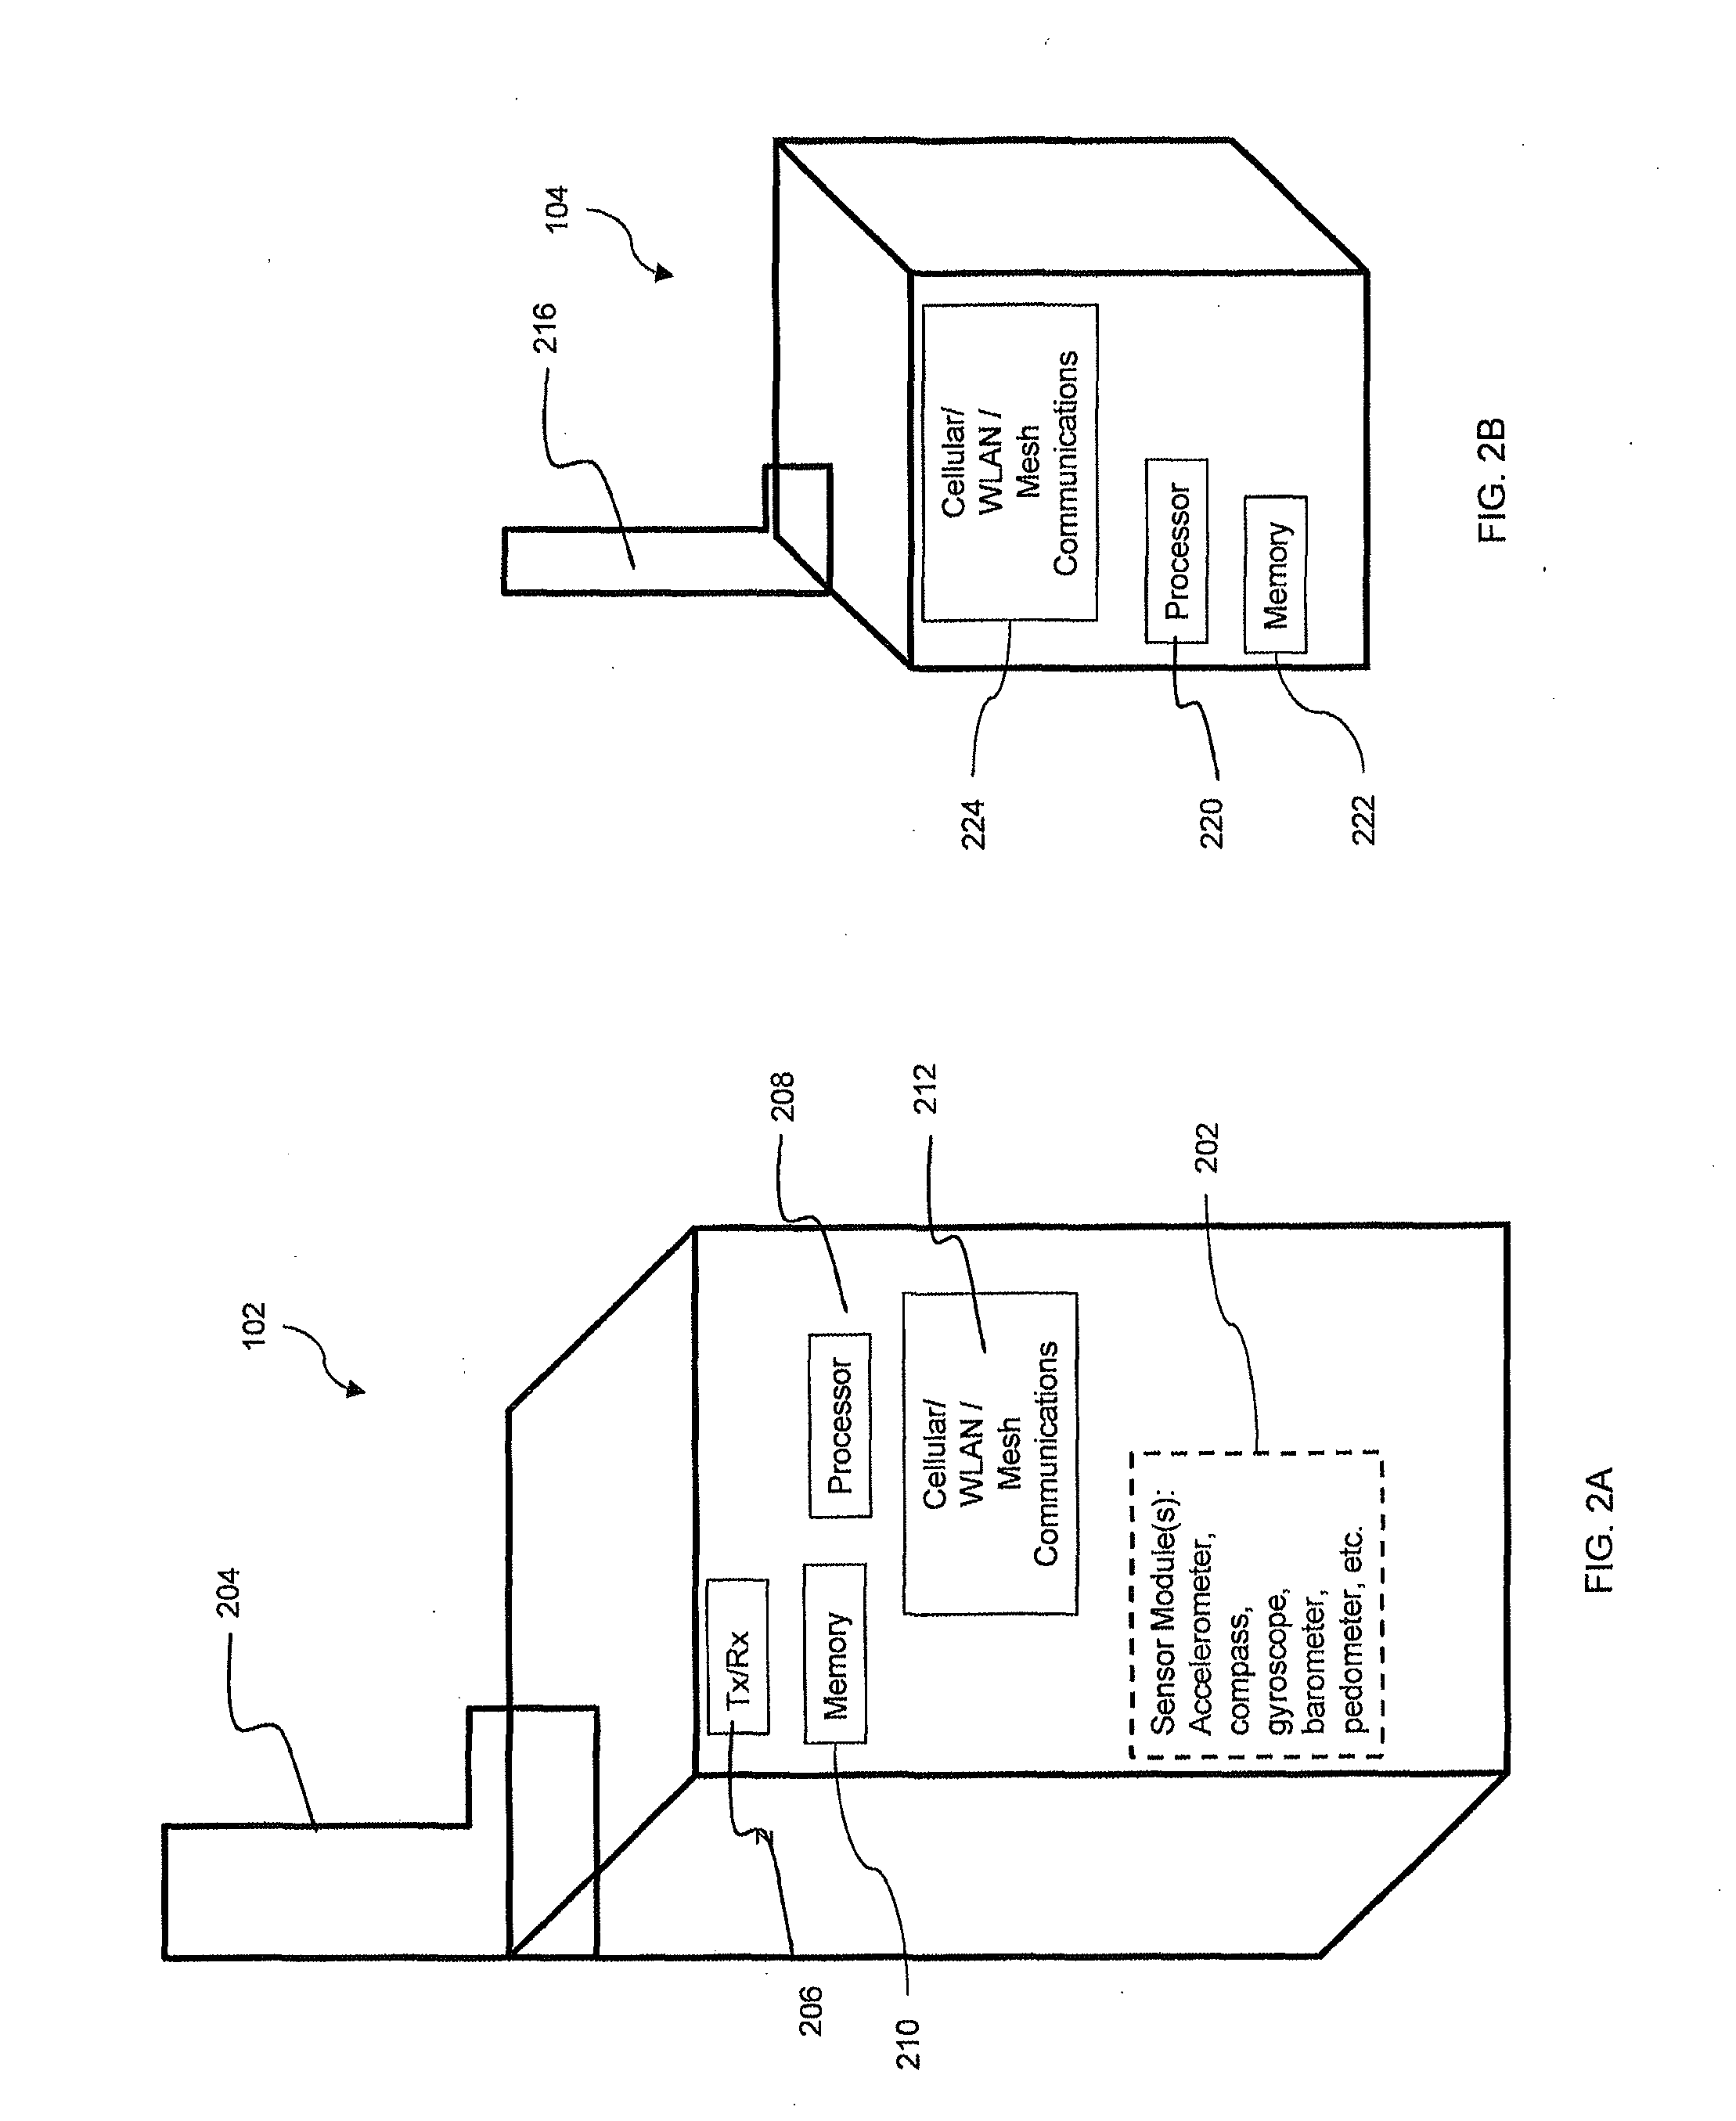 Determination of proximity using a plurality of transponders